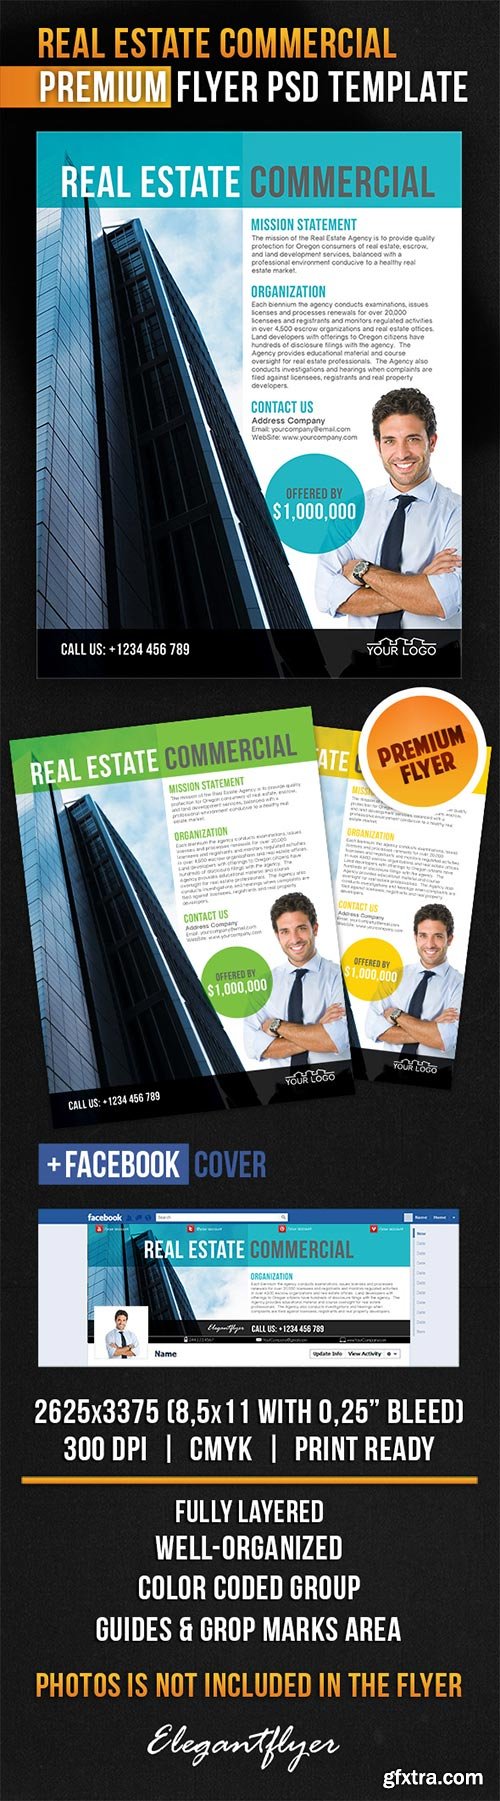 Real Estate Commercial Flyer PSD Template + Facebook Cover